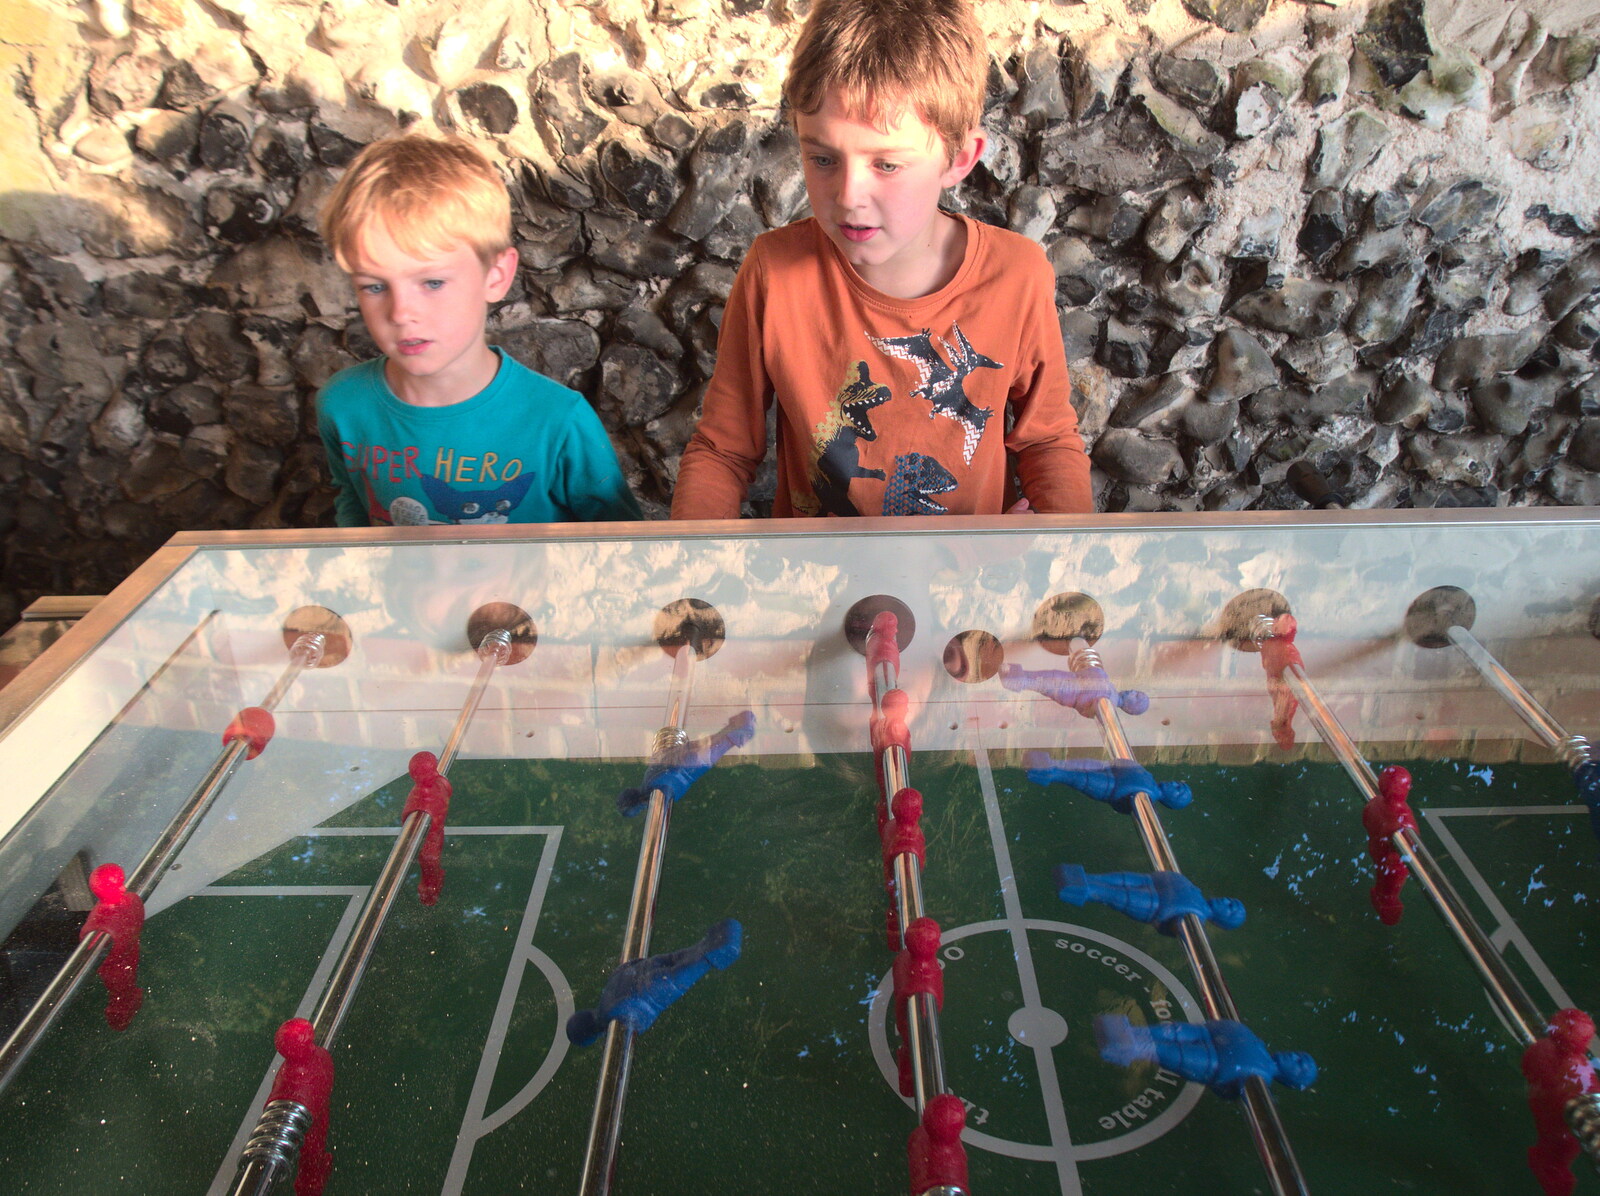 The boys on table football from Dower House Camping, West Harling, Norfolk - 27th May 2018